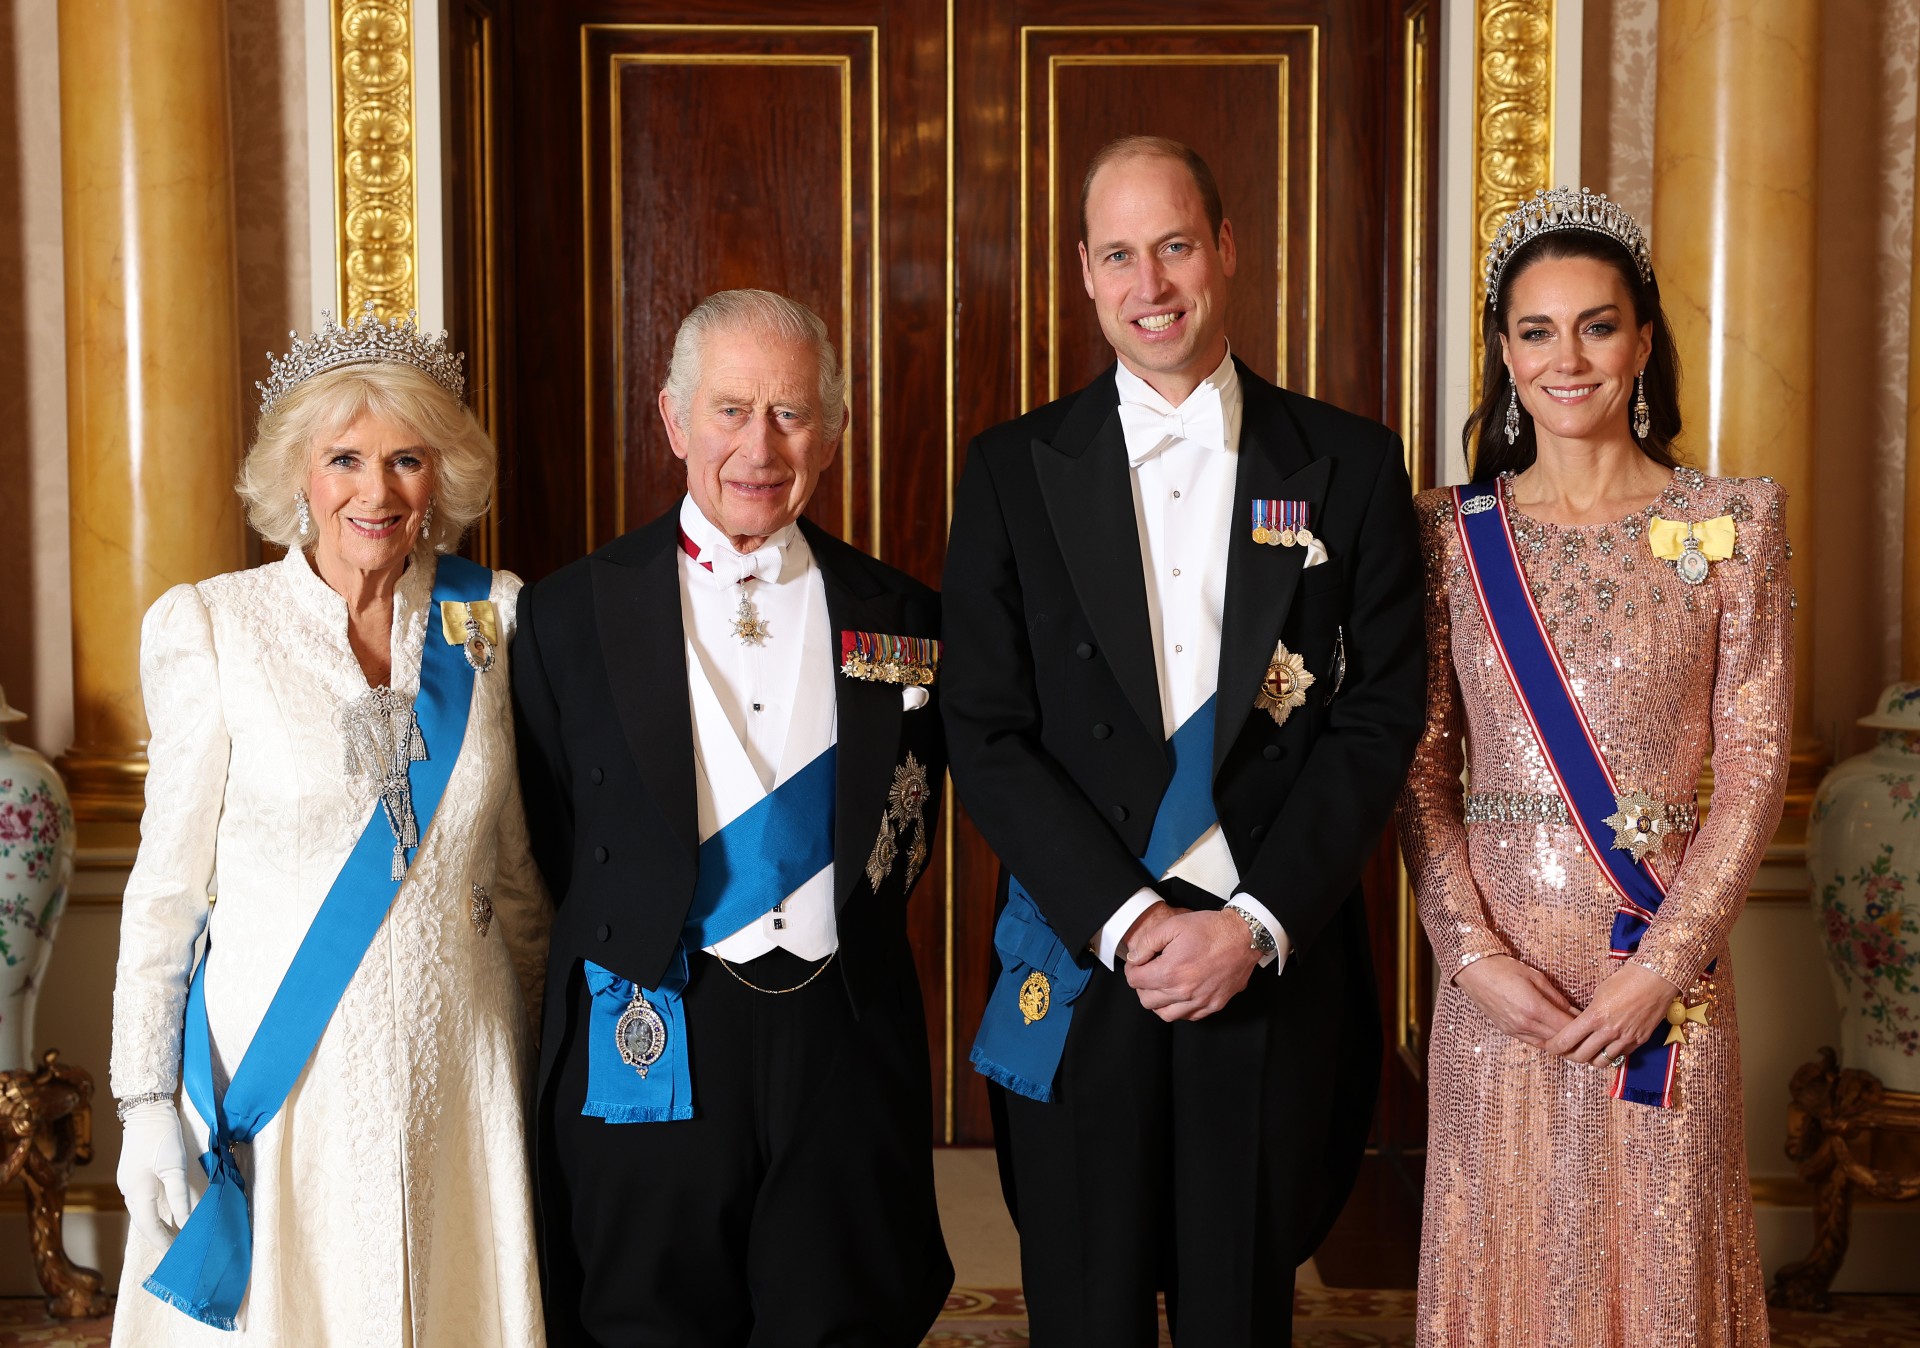 King Charles, Queen Camilla, Prince William, and Princess Kate